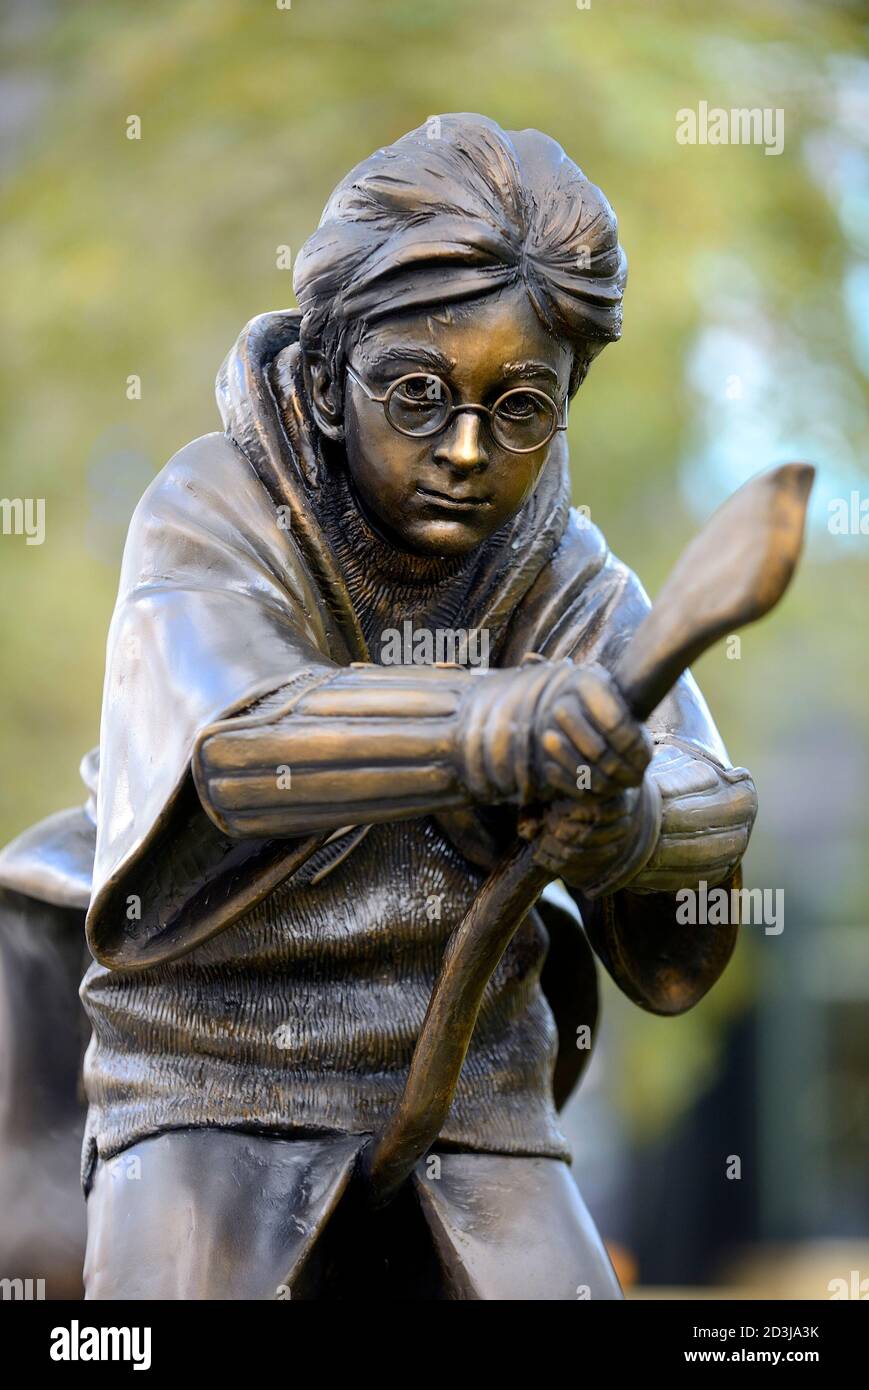 London, England, UK. Harry Potter (Daniel Radcliffe) bronze statue in Leicester Square, latest addition to the Scenes In The Square trail (unveiled Oc Stock Photo